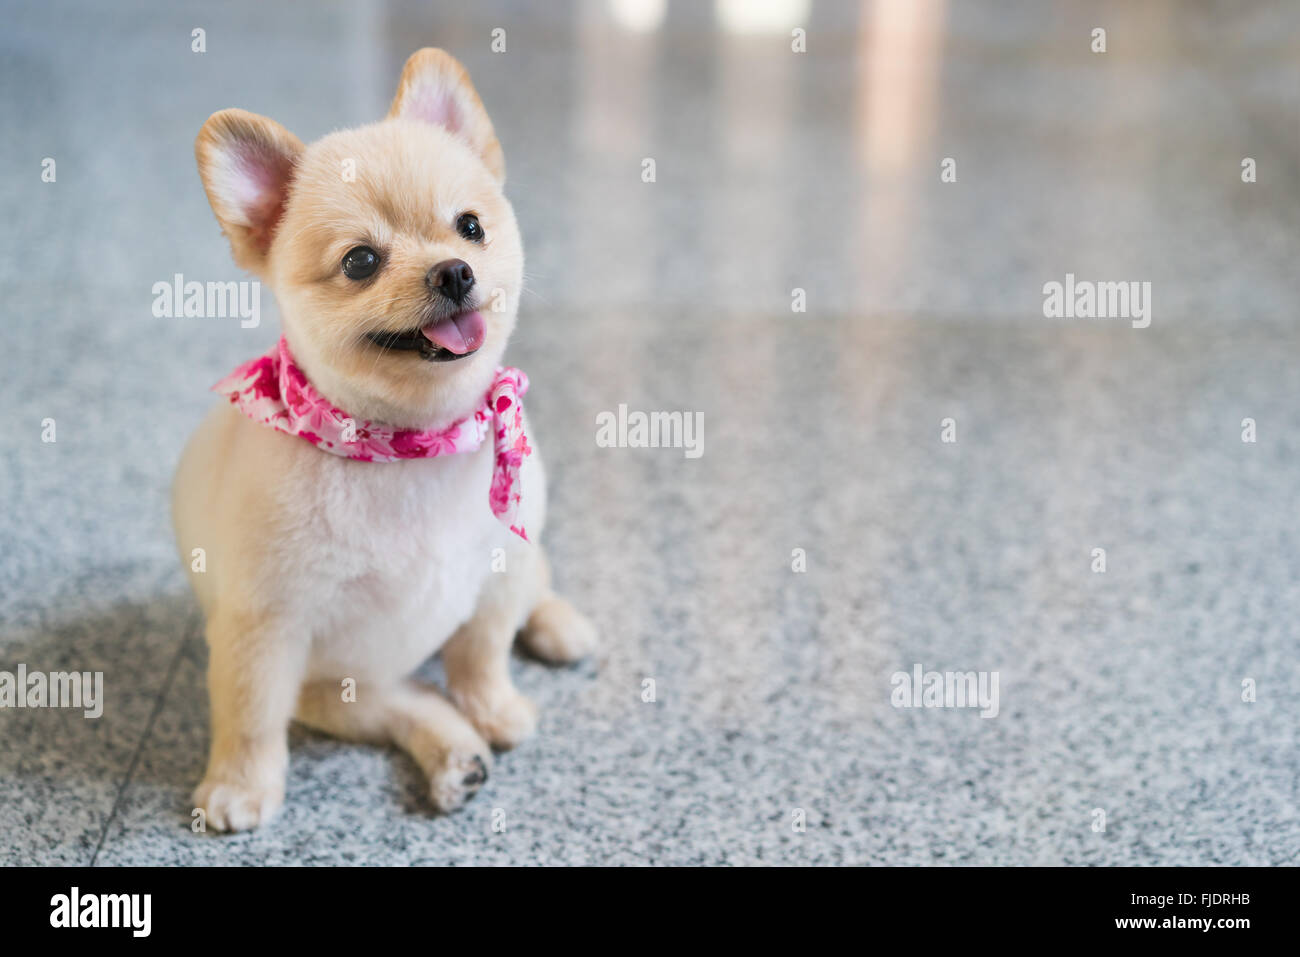 Pomeranian dog smiling, looking up, with copy space Stock Photo